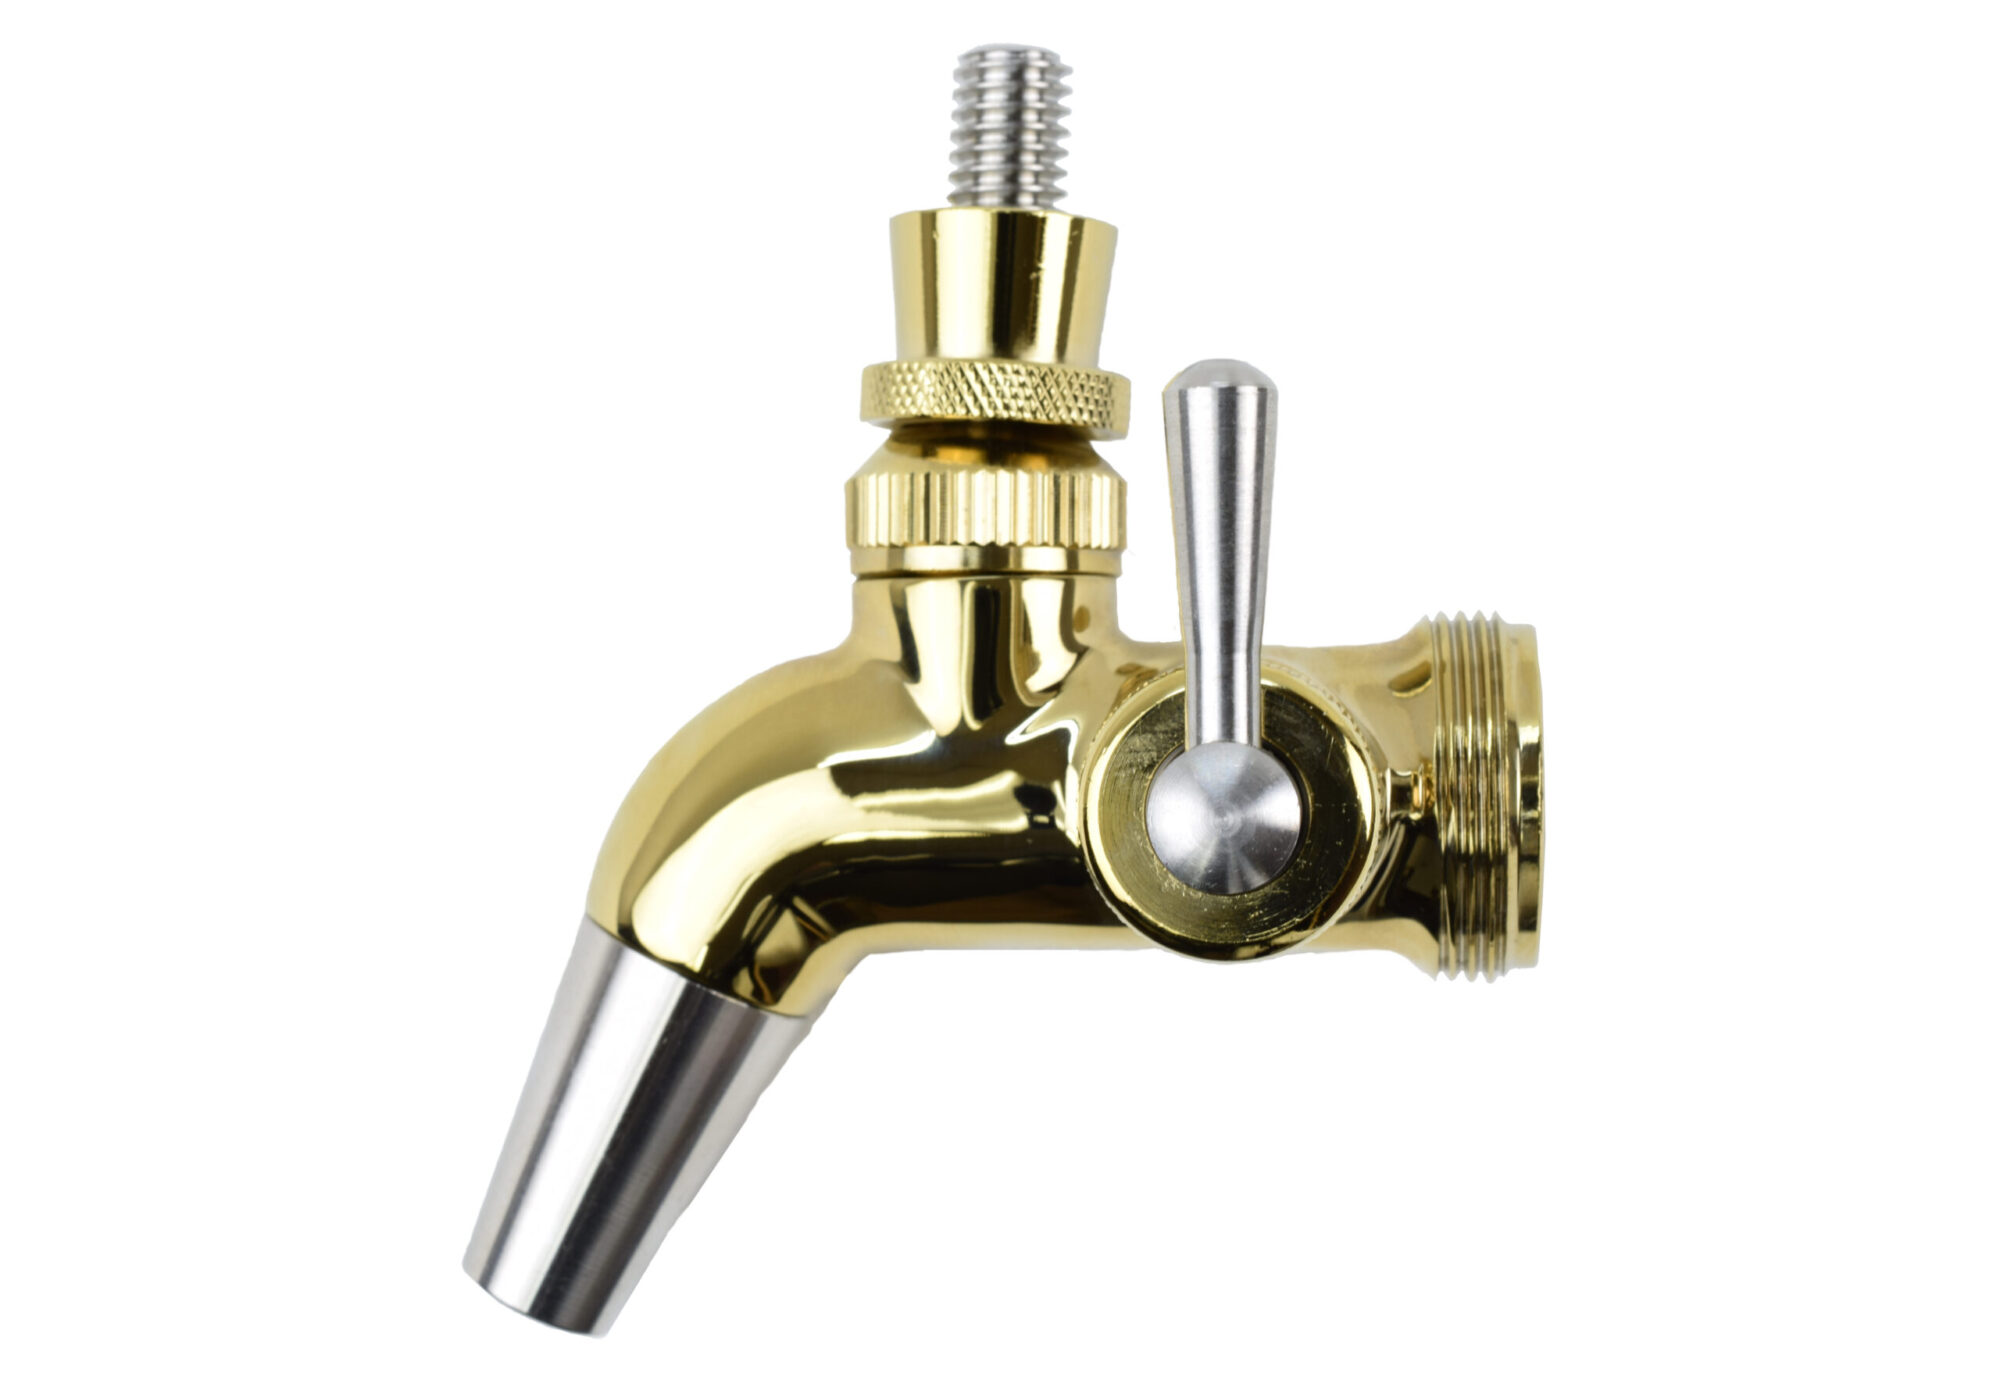 661STFG Gold Plated Stainless Steel Forward Sealing Faucet with Foam Control Knob and Removable Spout